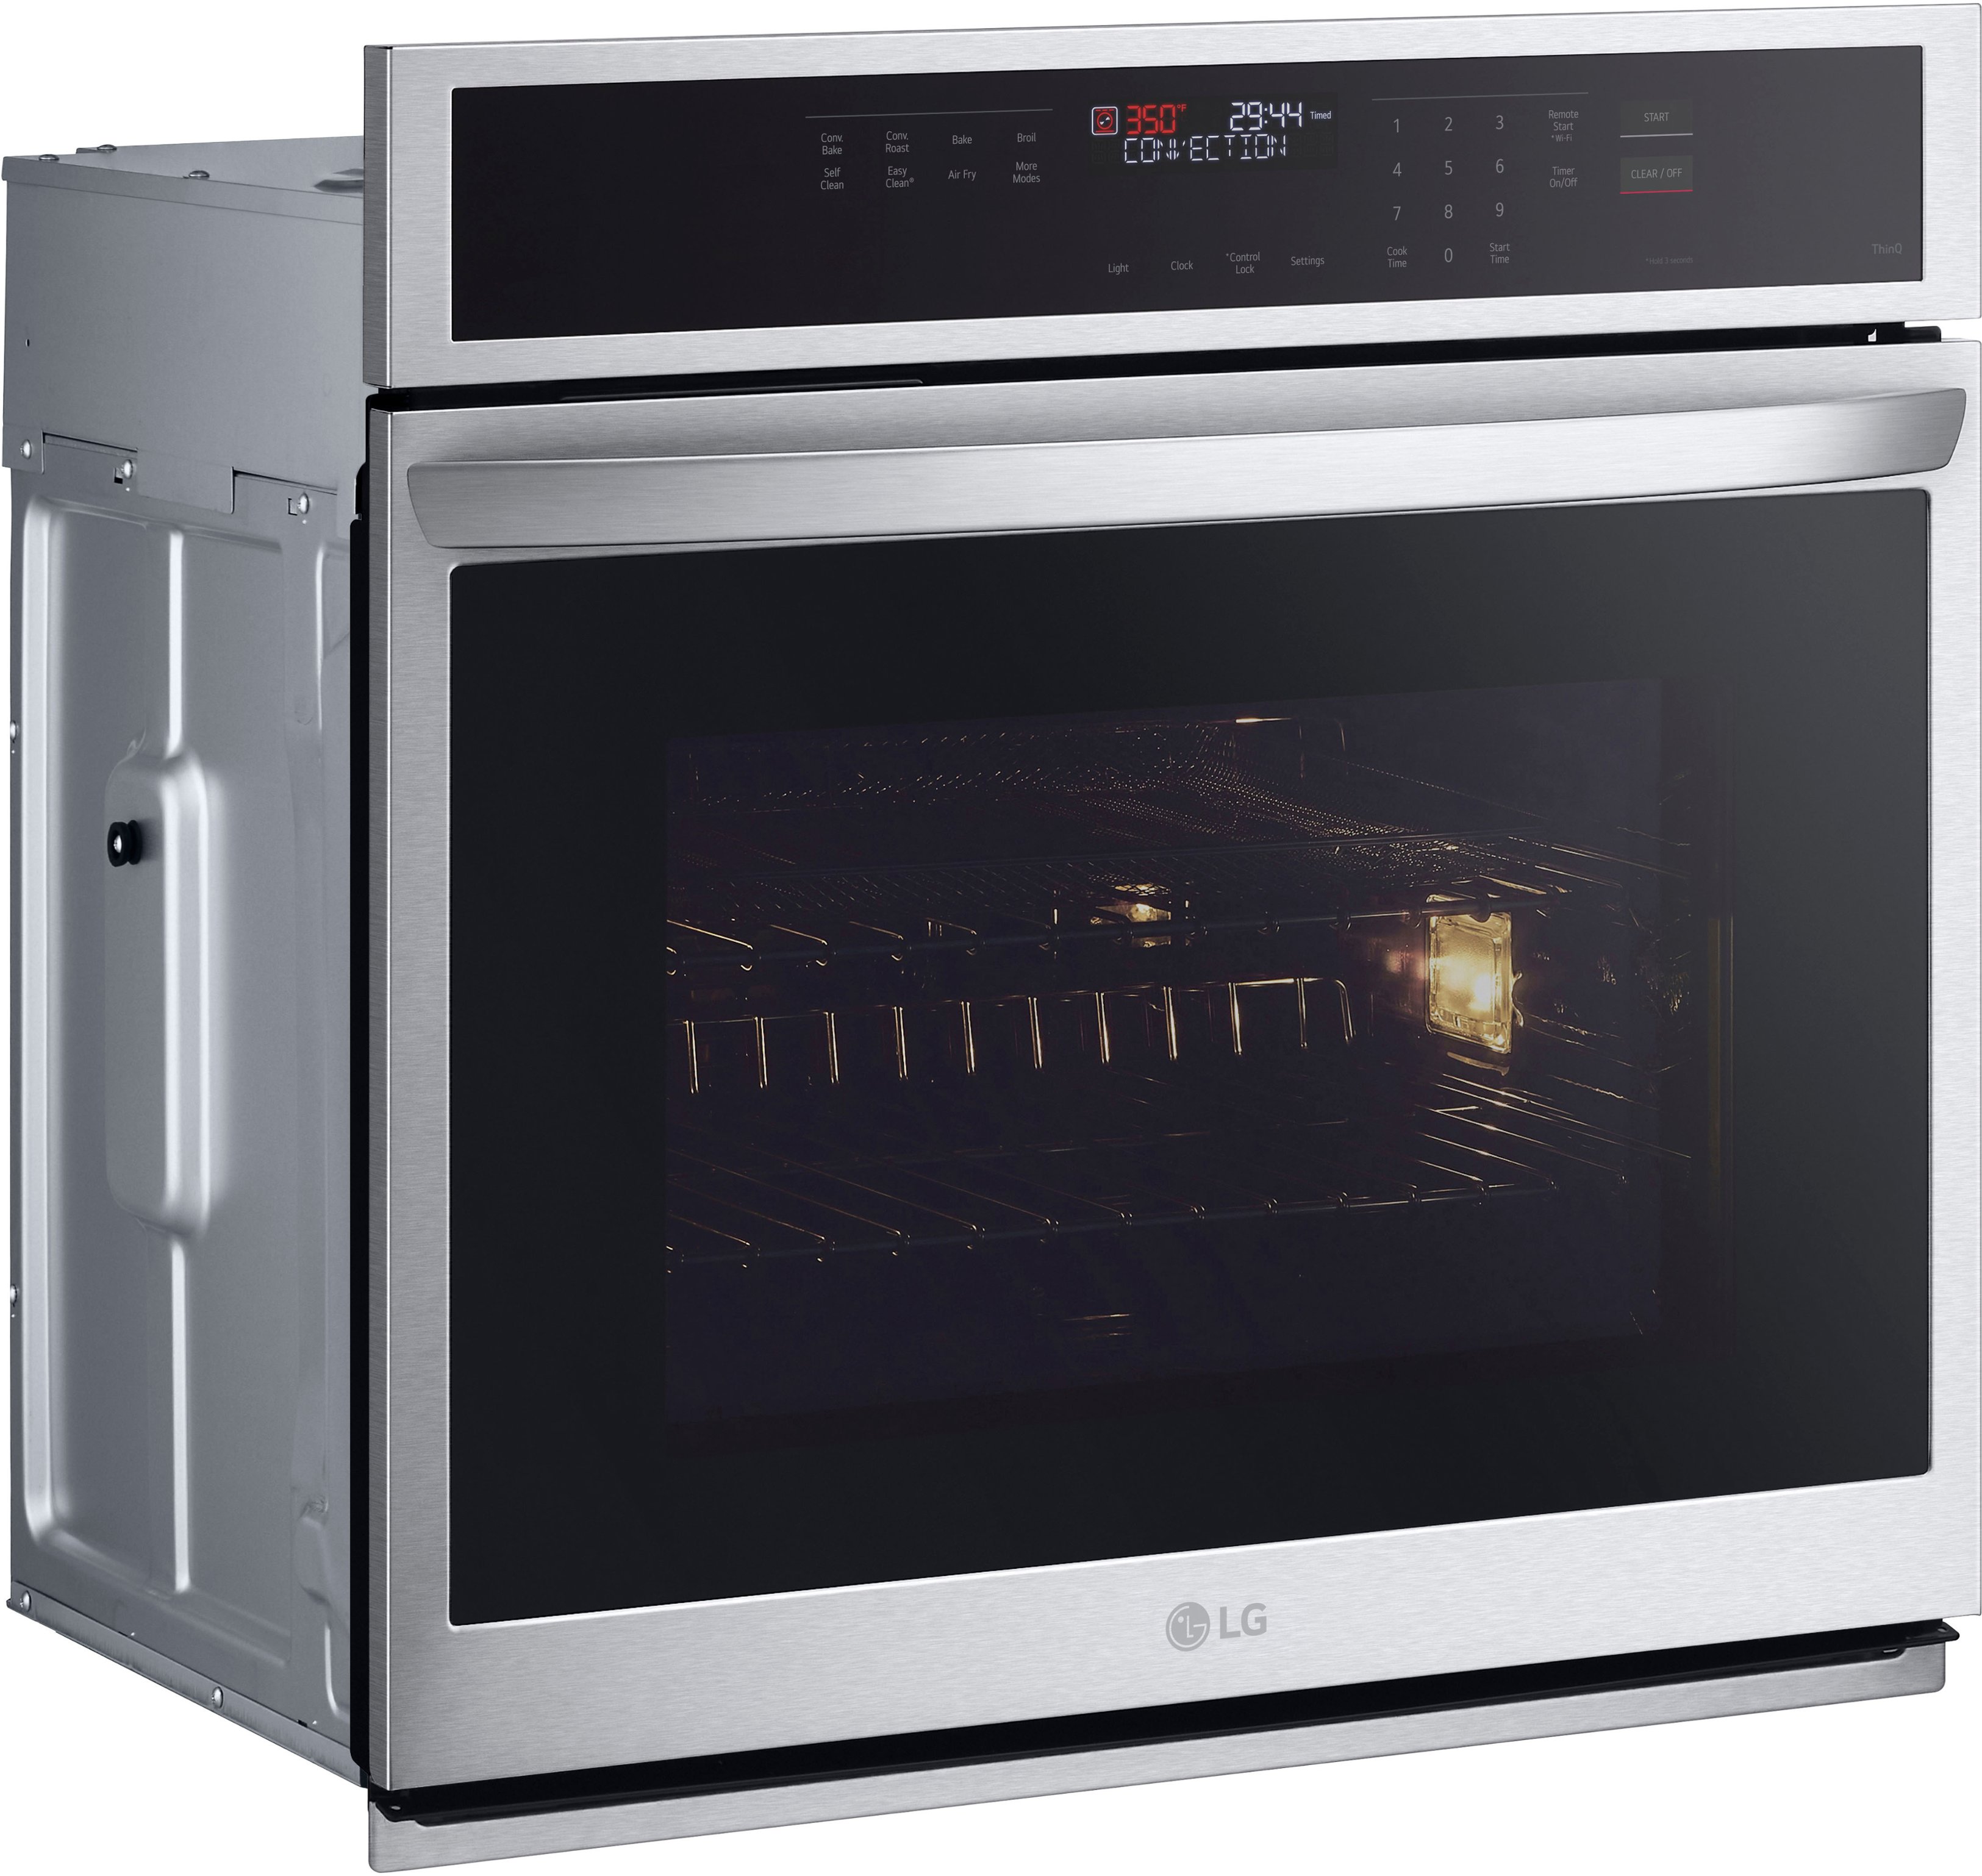 Angle View: LG - 30" Smart Built-In Single Electric Convection Wall Oven with Air Fry - Stainless Steel